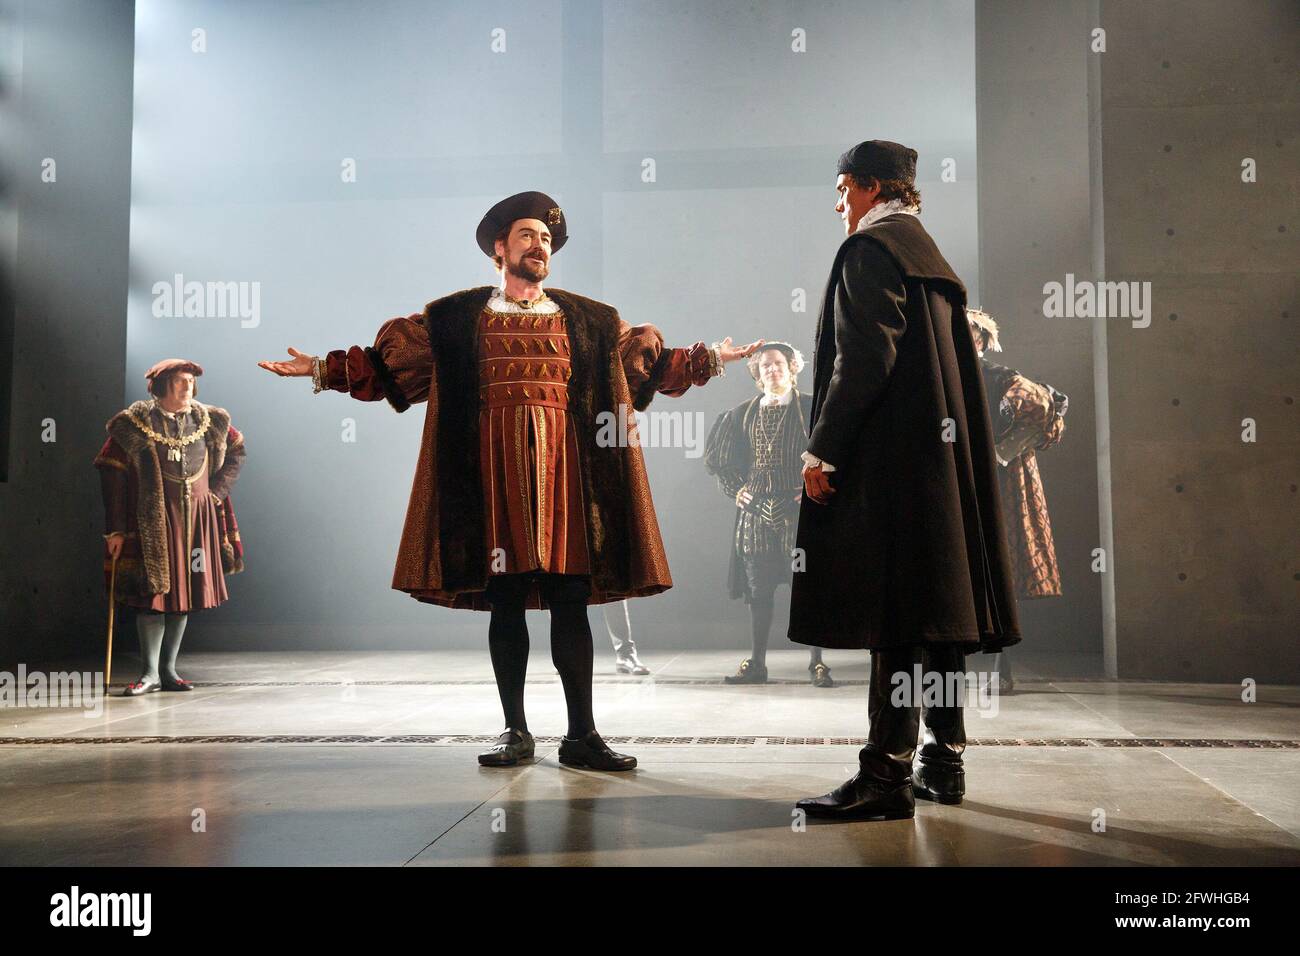 l-r: Nathaniel Parker (King Henry VIII), Ben Miles (Thomas Cromwell) in WOLF HALL by Hilary Mantel at the Royal Shakespeare Company (RSC), Aldwych Theatre, London WC2  17/05/2014 adapted for the stage by Mike Poulton  design: Christopher Oram  lighting: Paule Constable  director: Jeremy Herrin Stock Photo